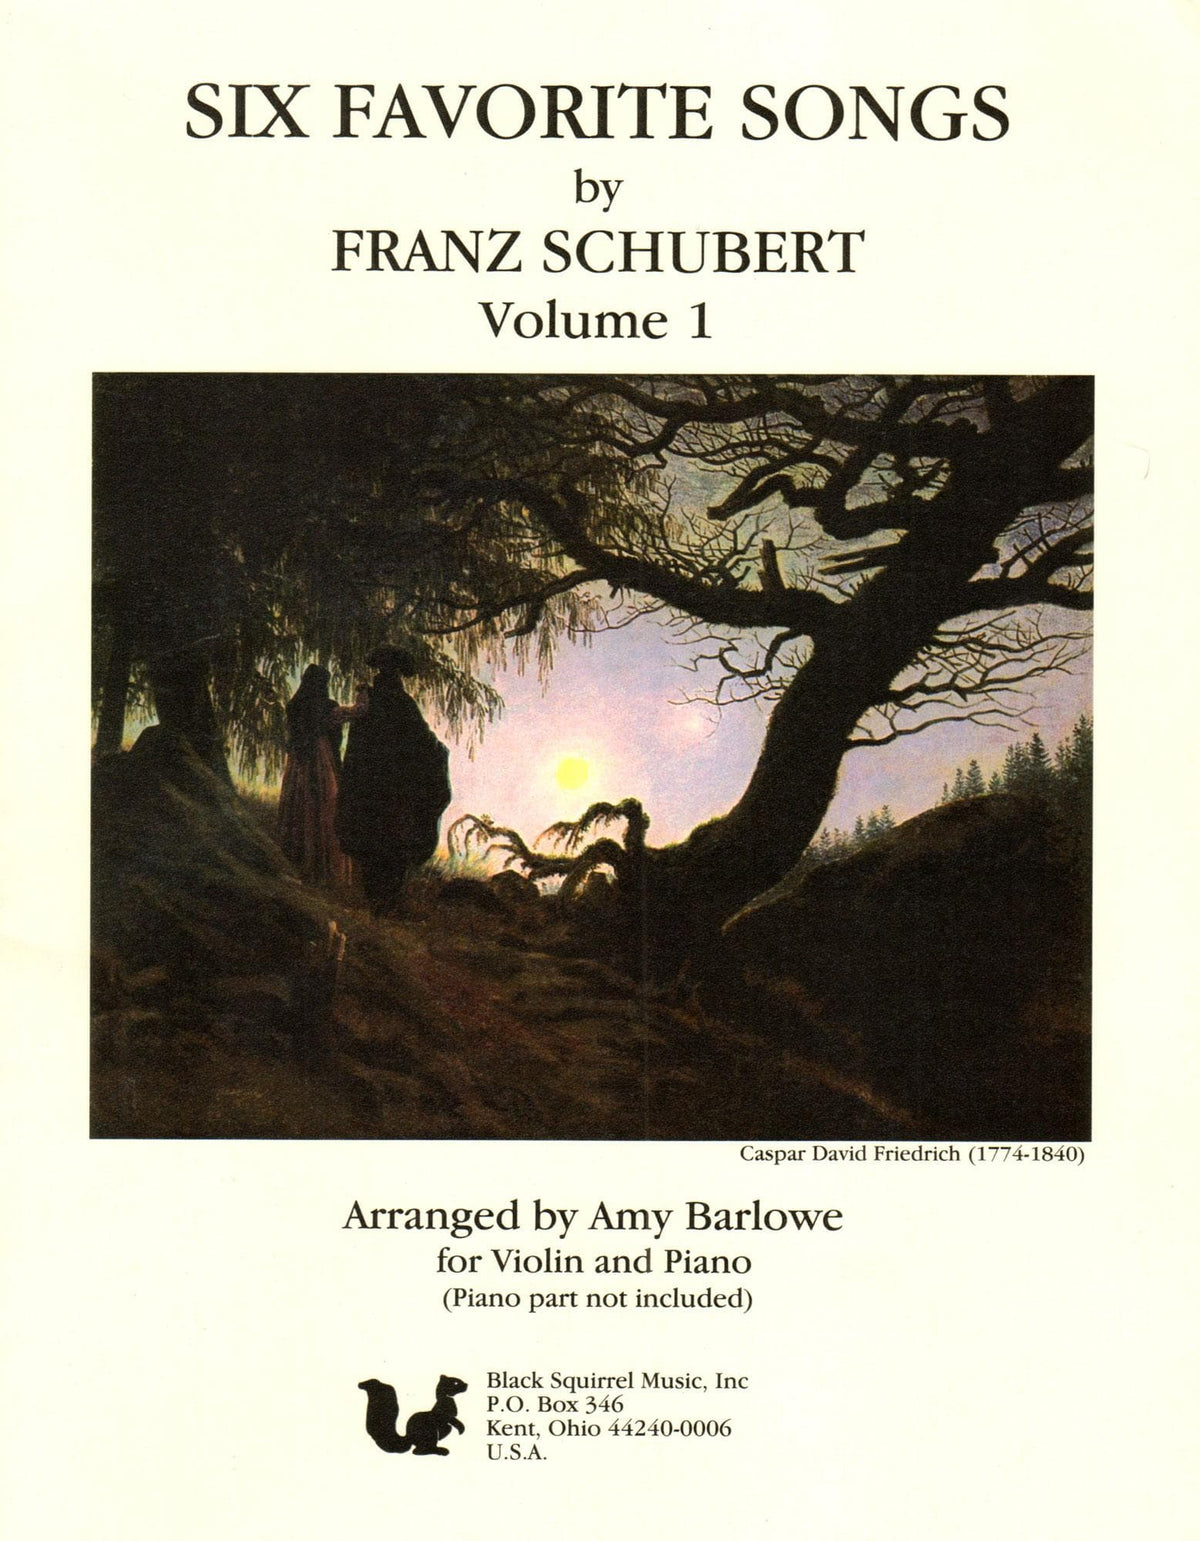 Schubert, Franz - Six Favorite Songs for Violin and Piano, Vol. 1 - Arranged by Amy Barlowe - Black Squirrel Publication